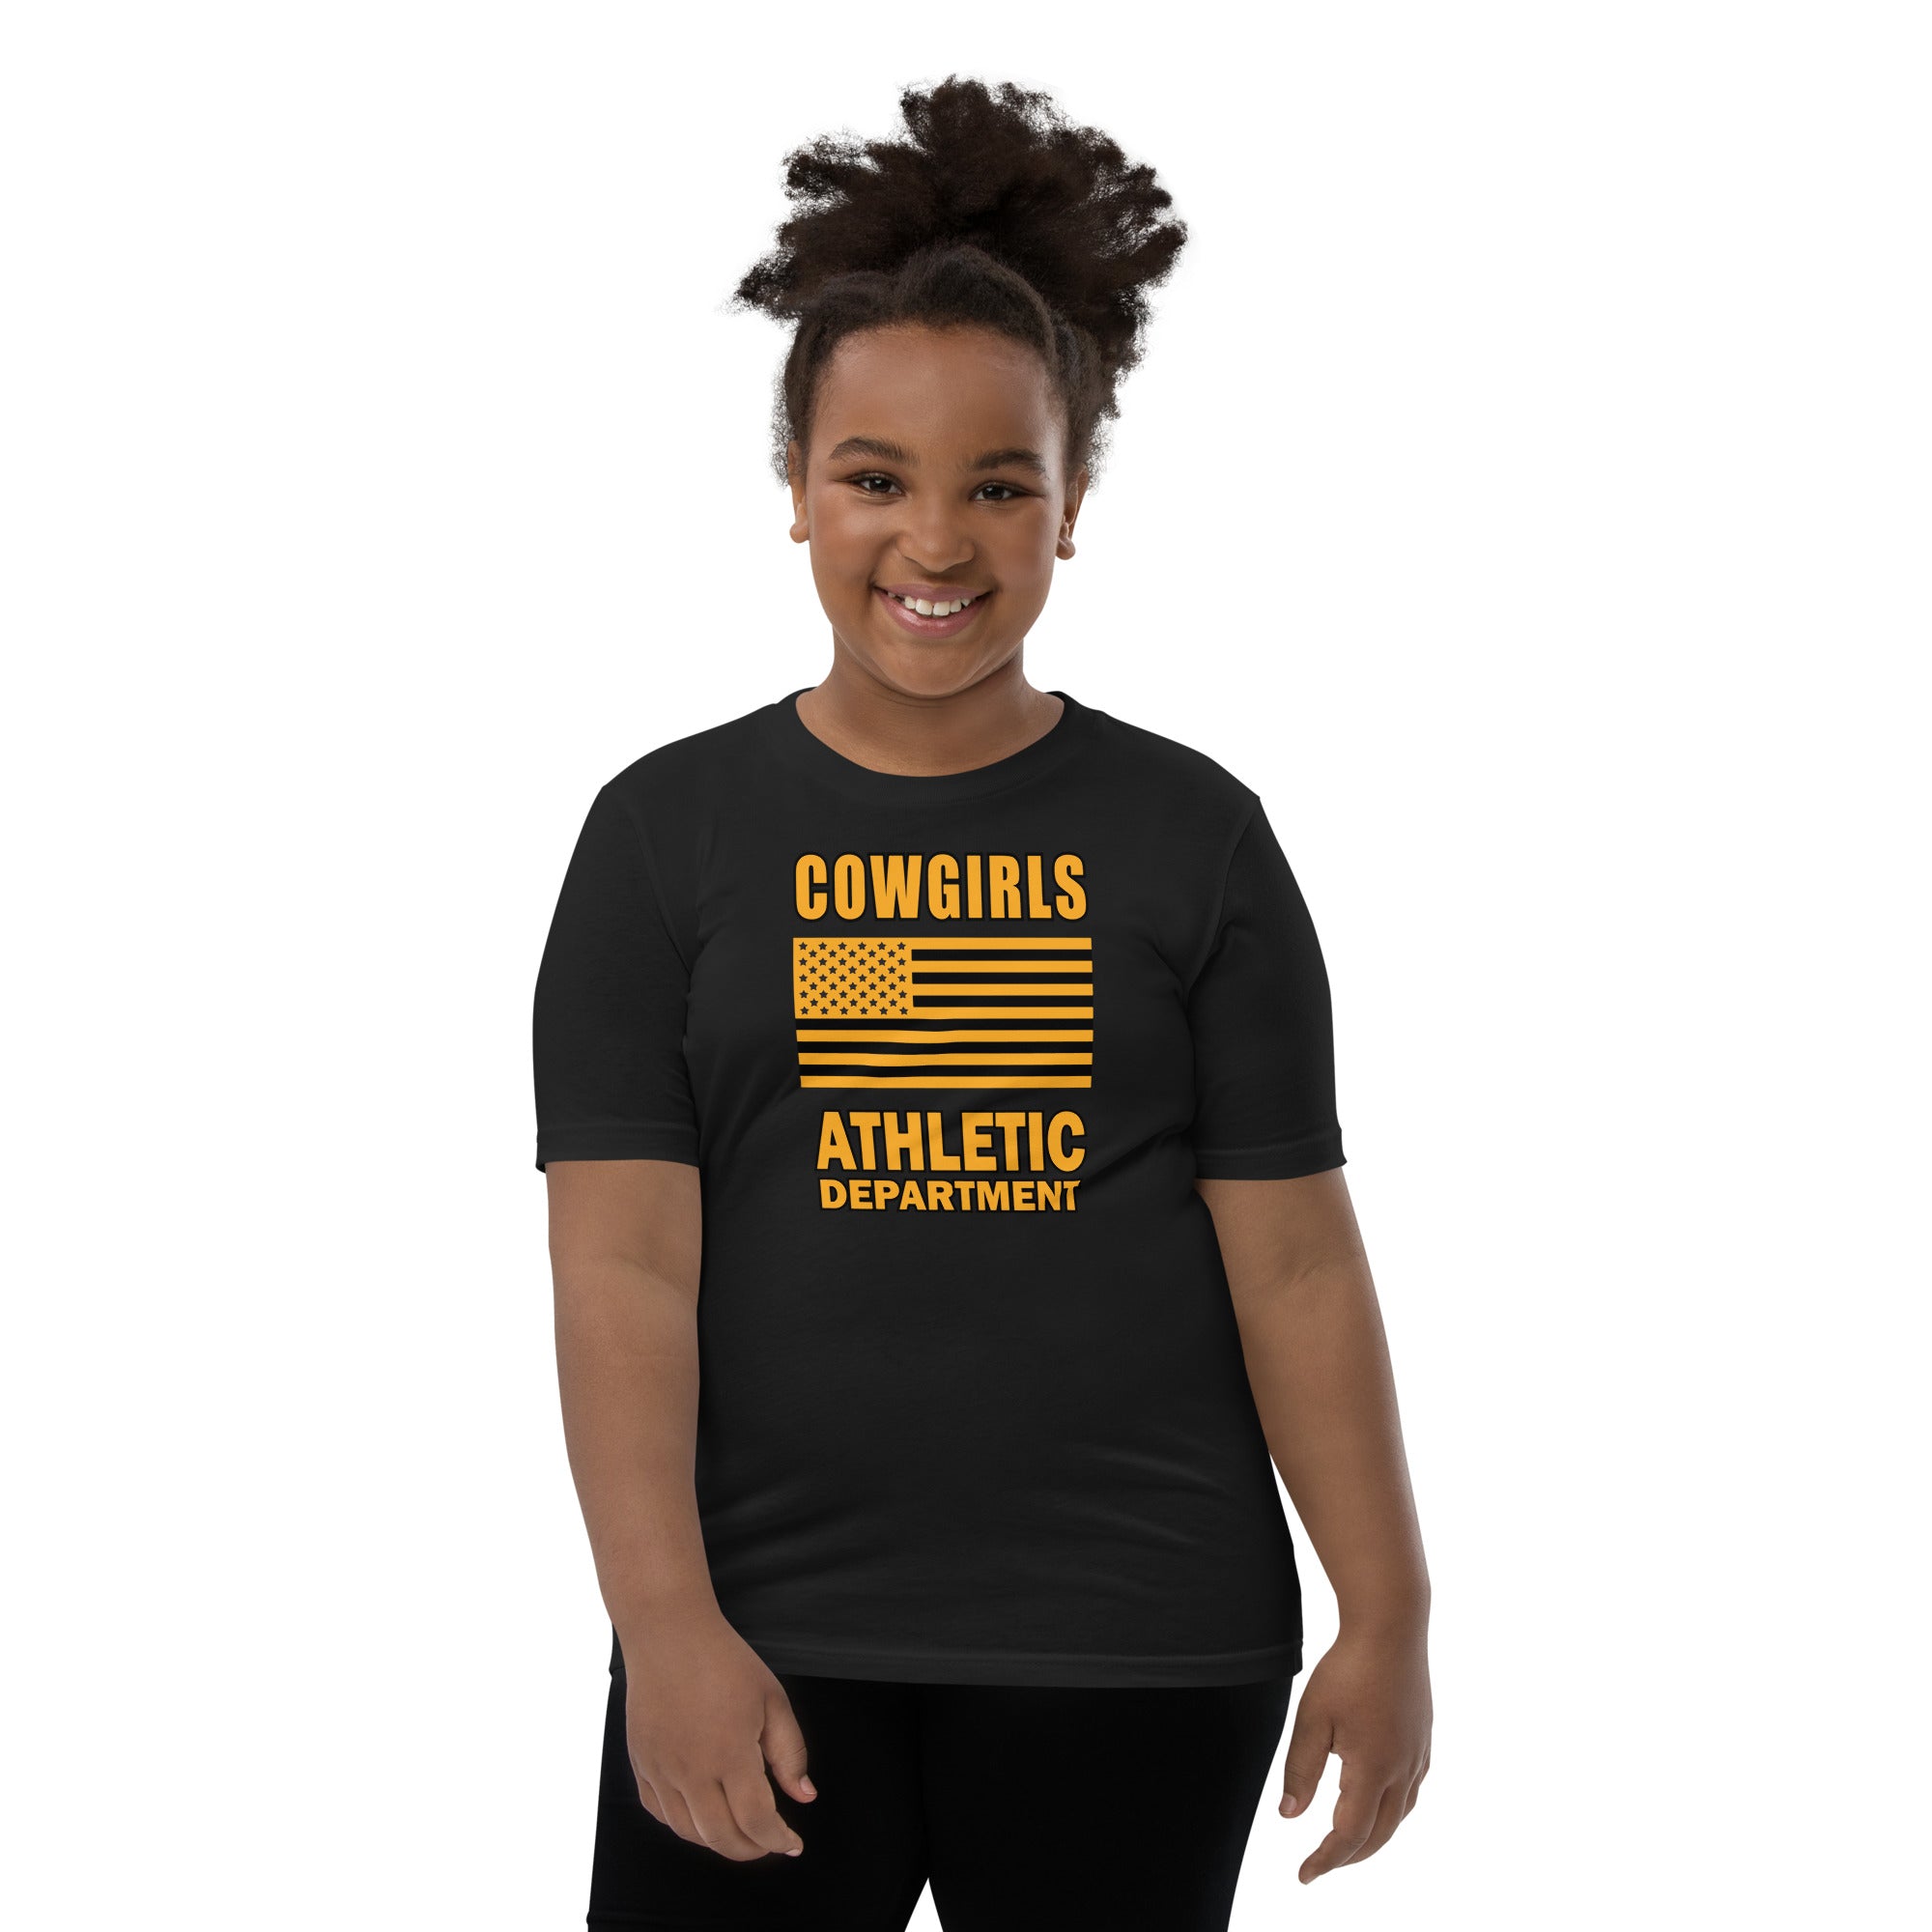 Cowgirls Athletic Dept Basketball Youth Short Sleeve T-Shirt